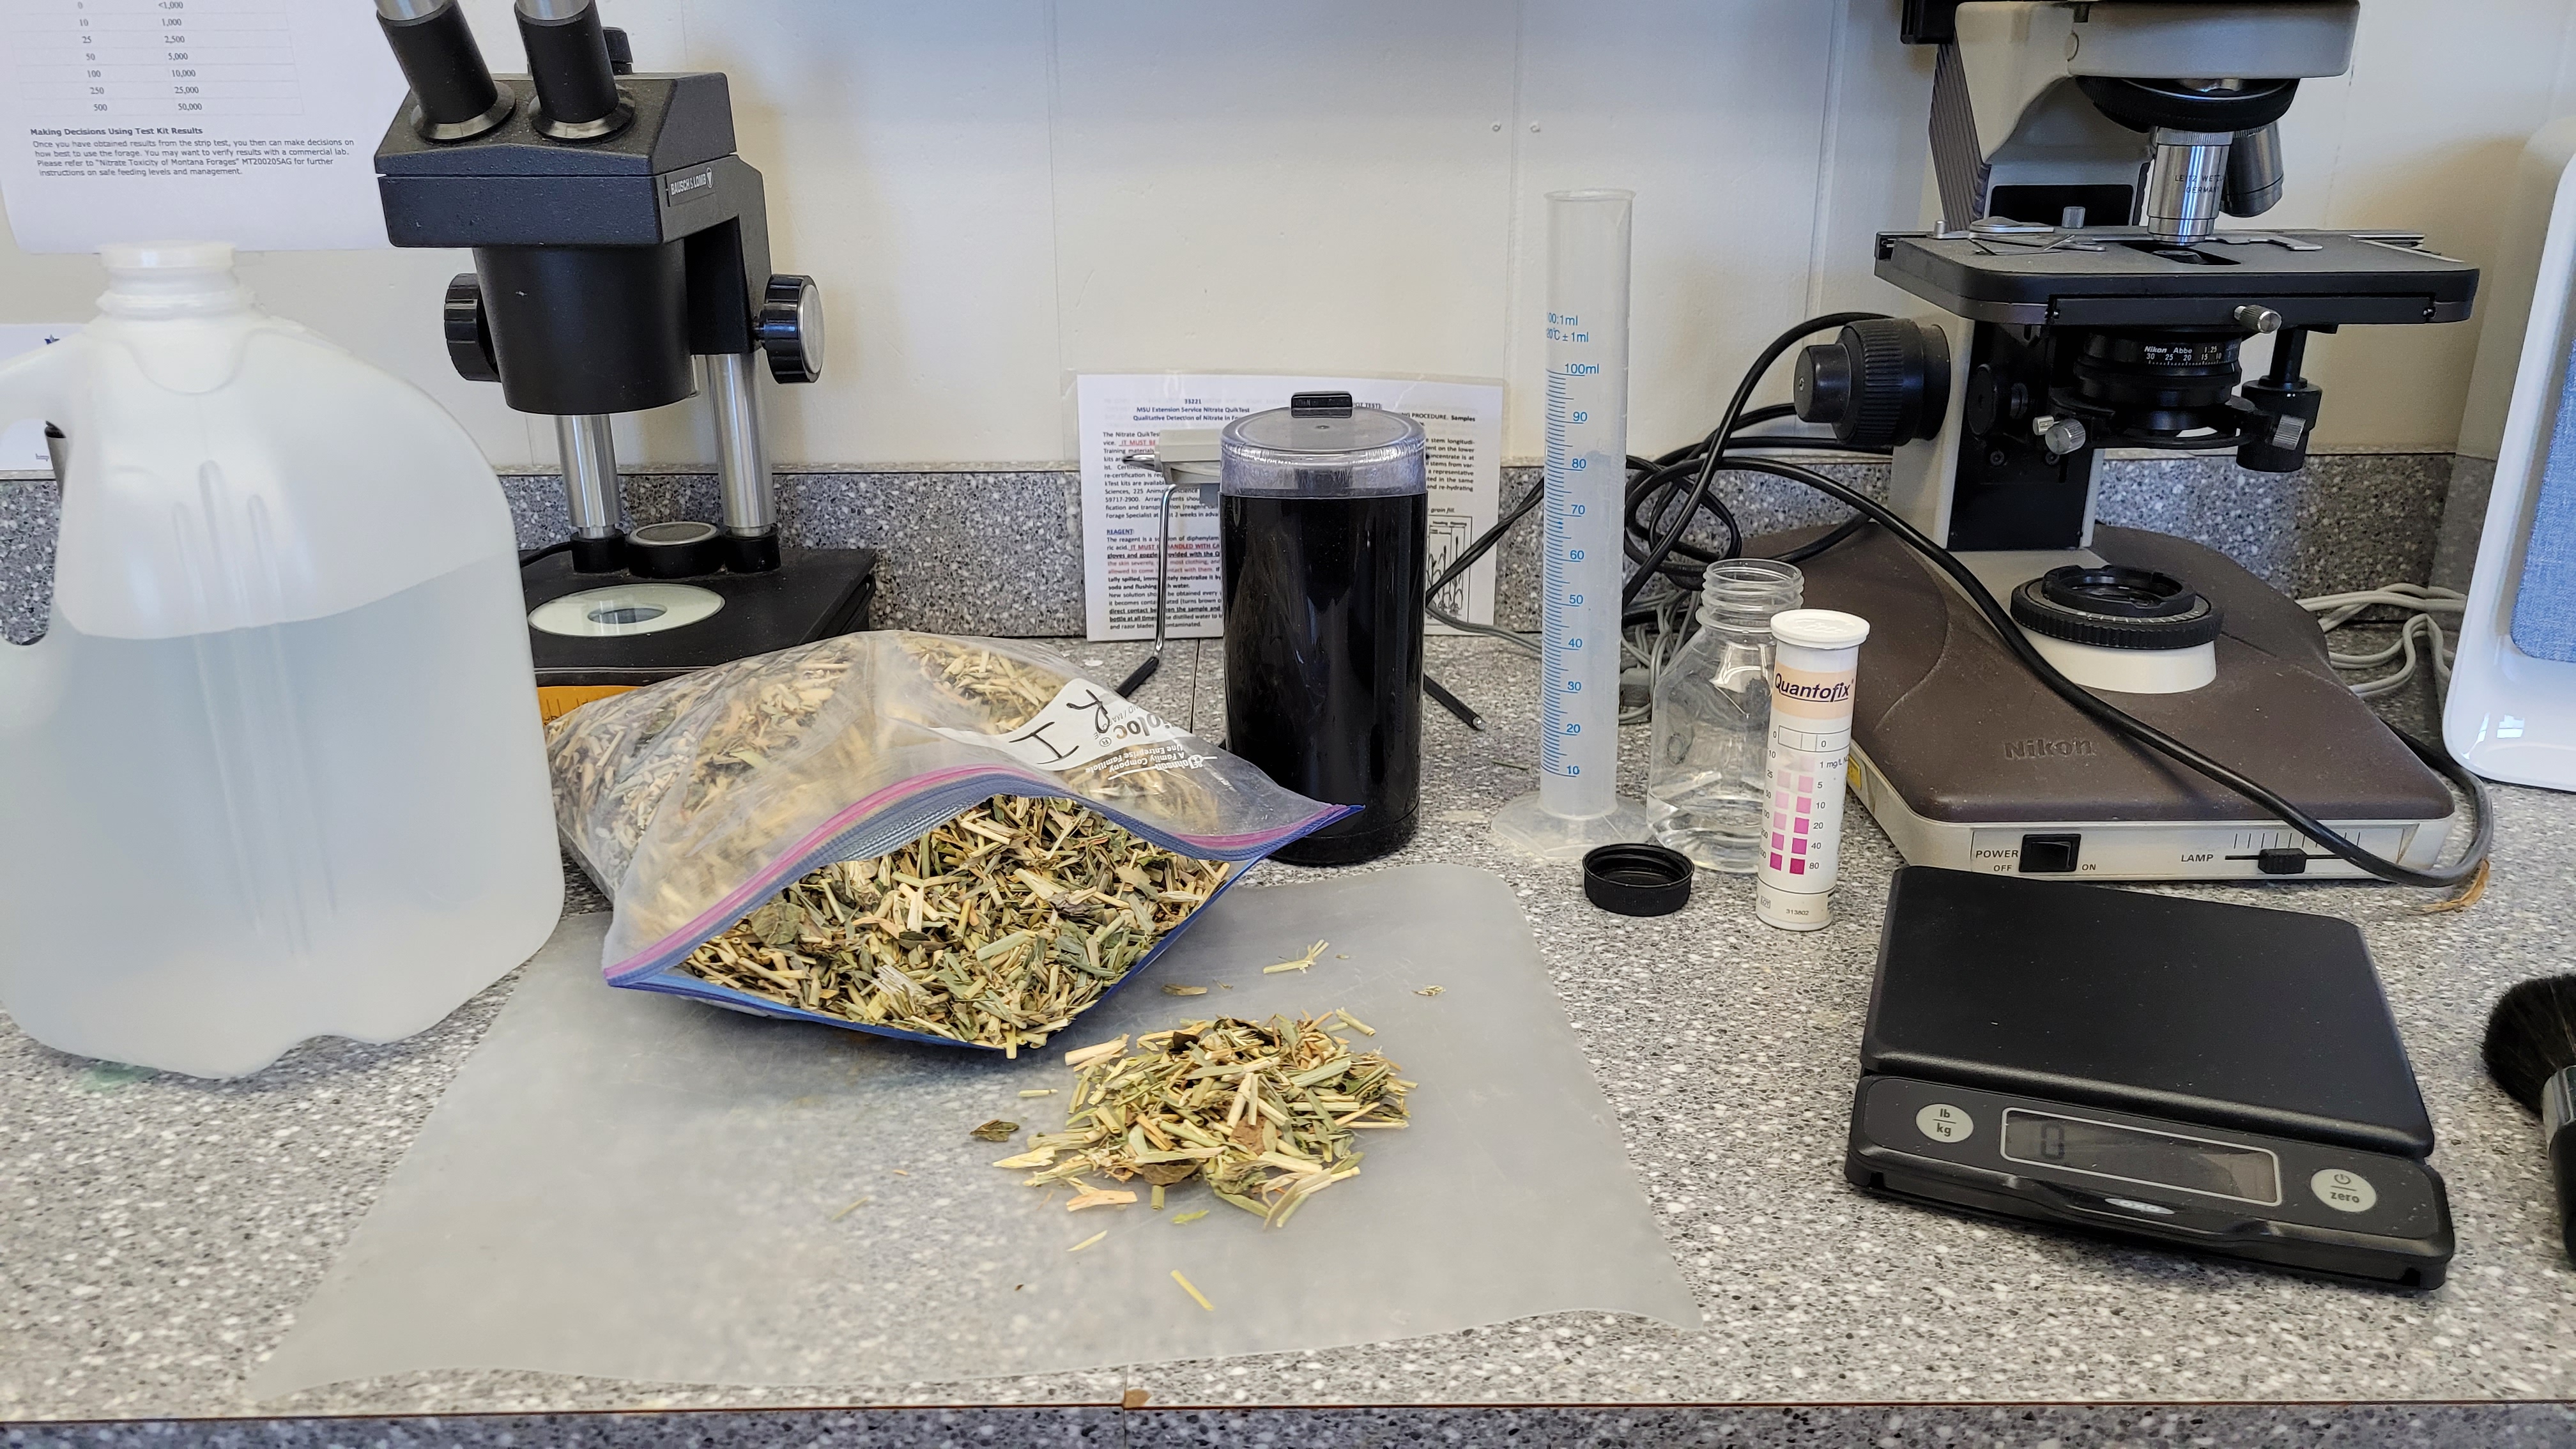 Testing for nitrates in a forage sample in Teton County